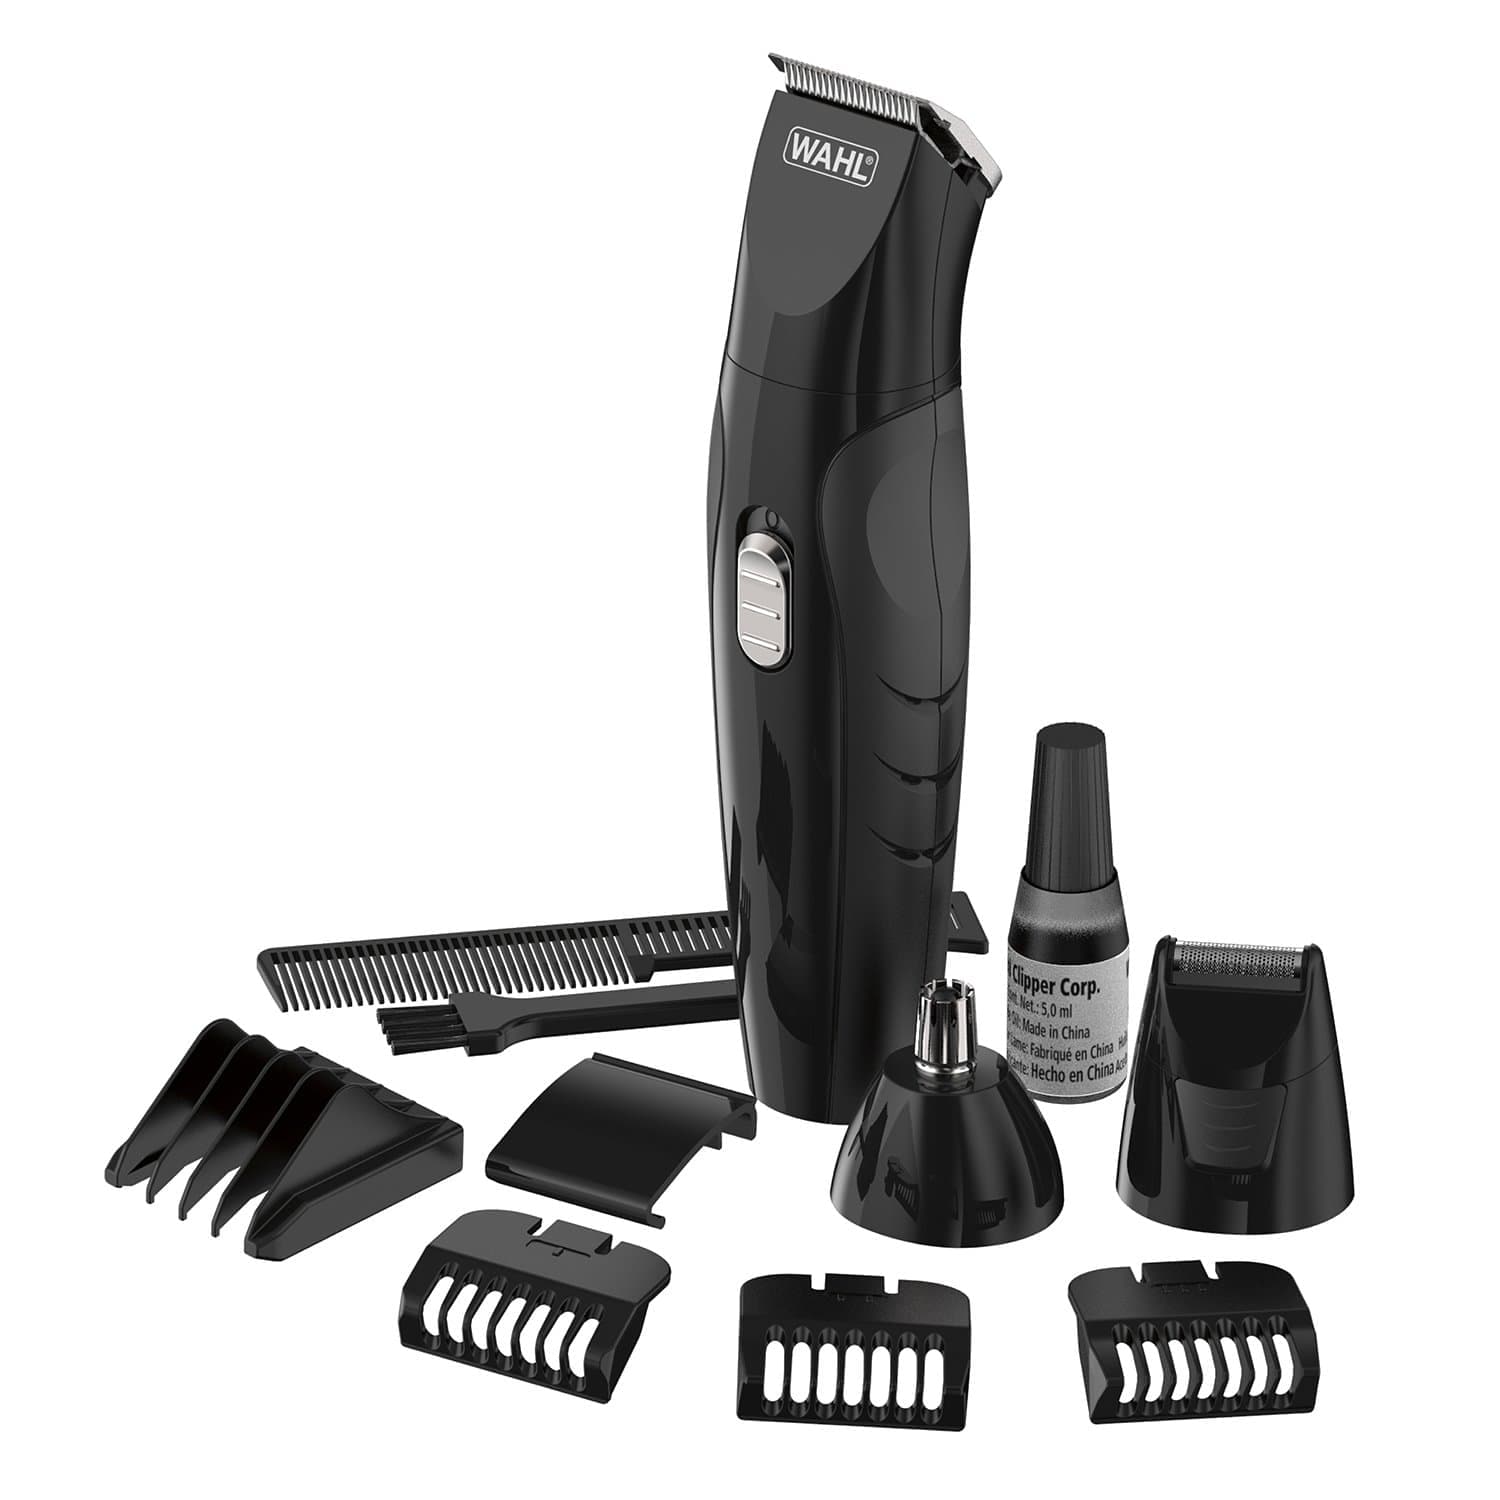 Wahl Groomsman All-In-One Trimmer + Body Groomer - 9685-017